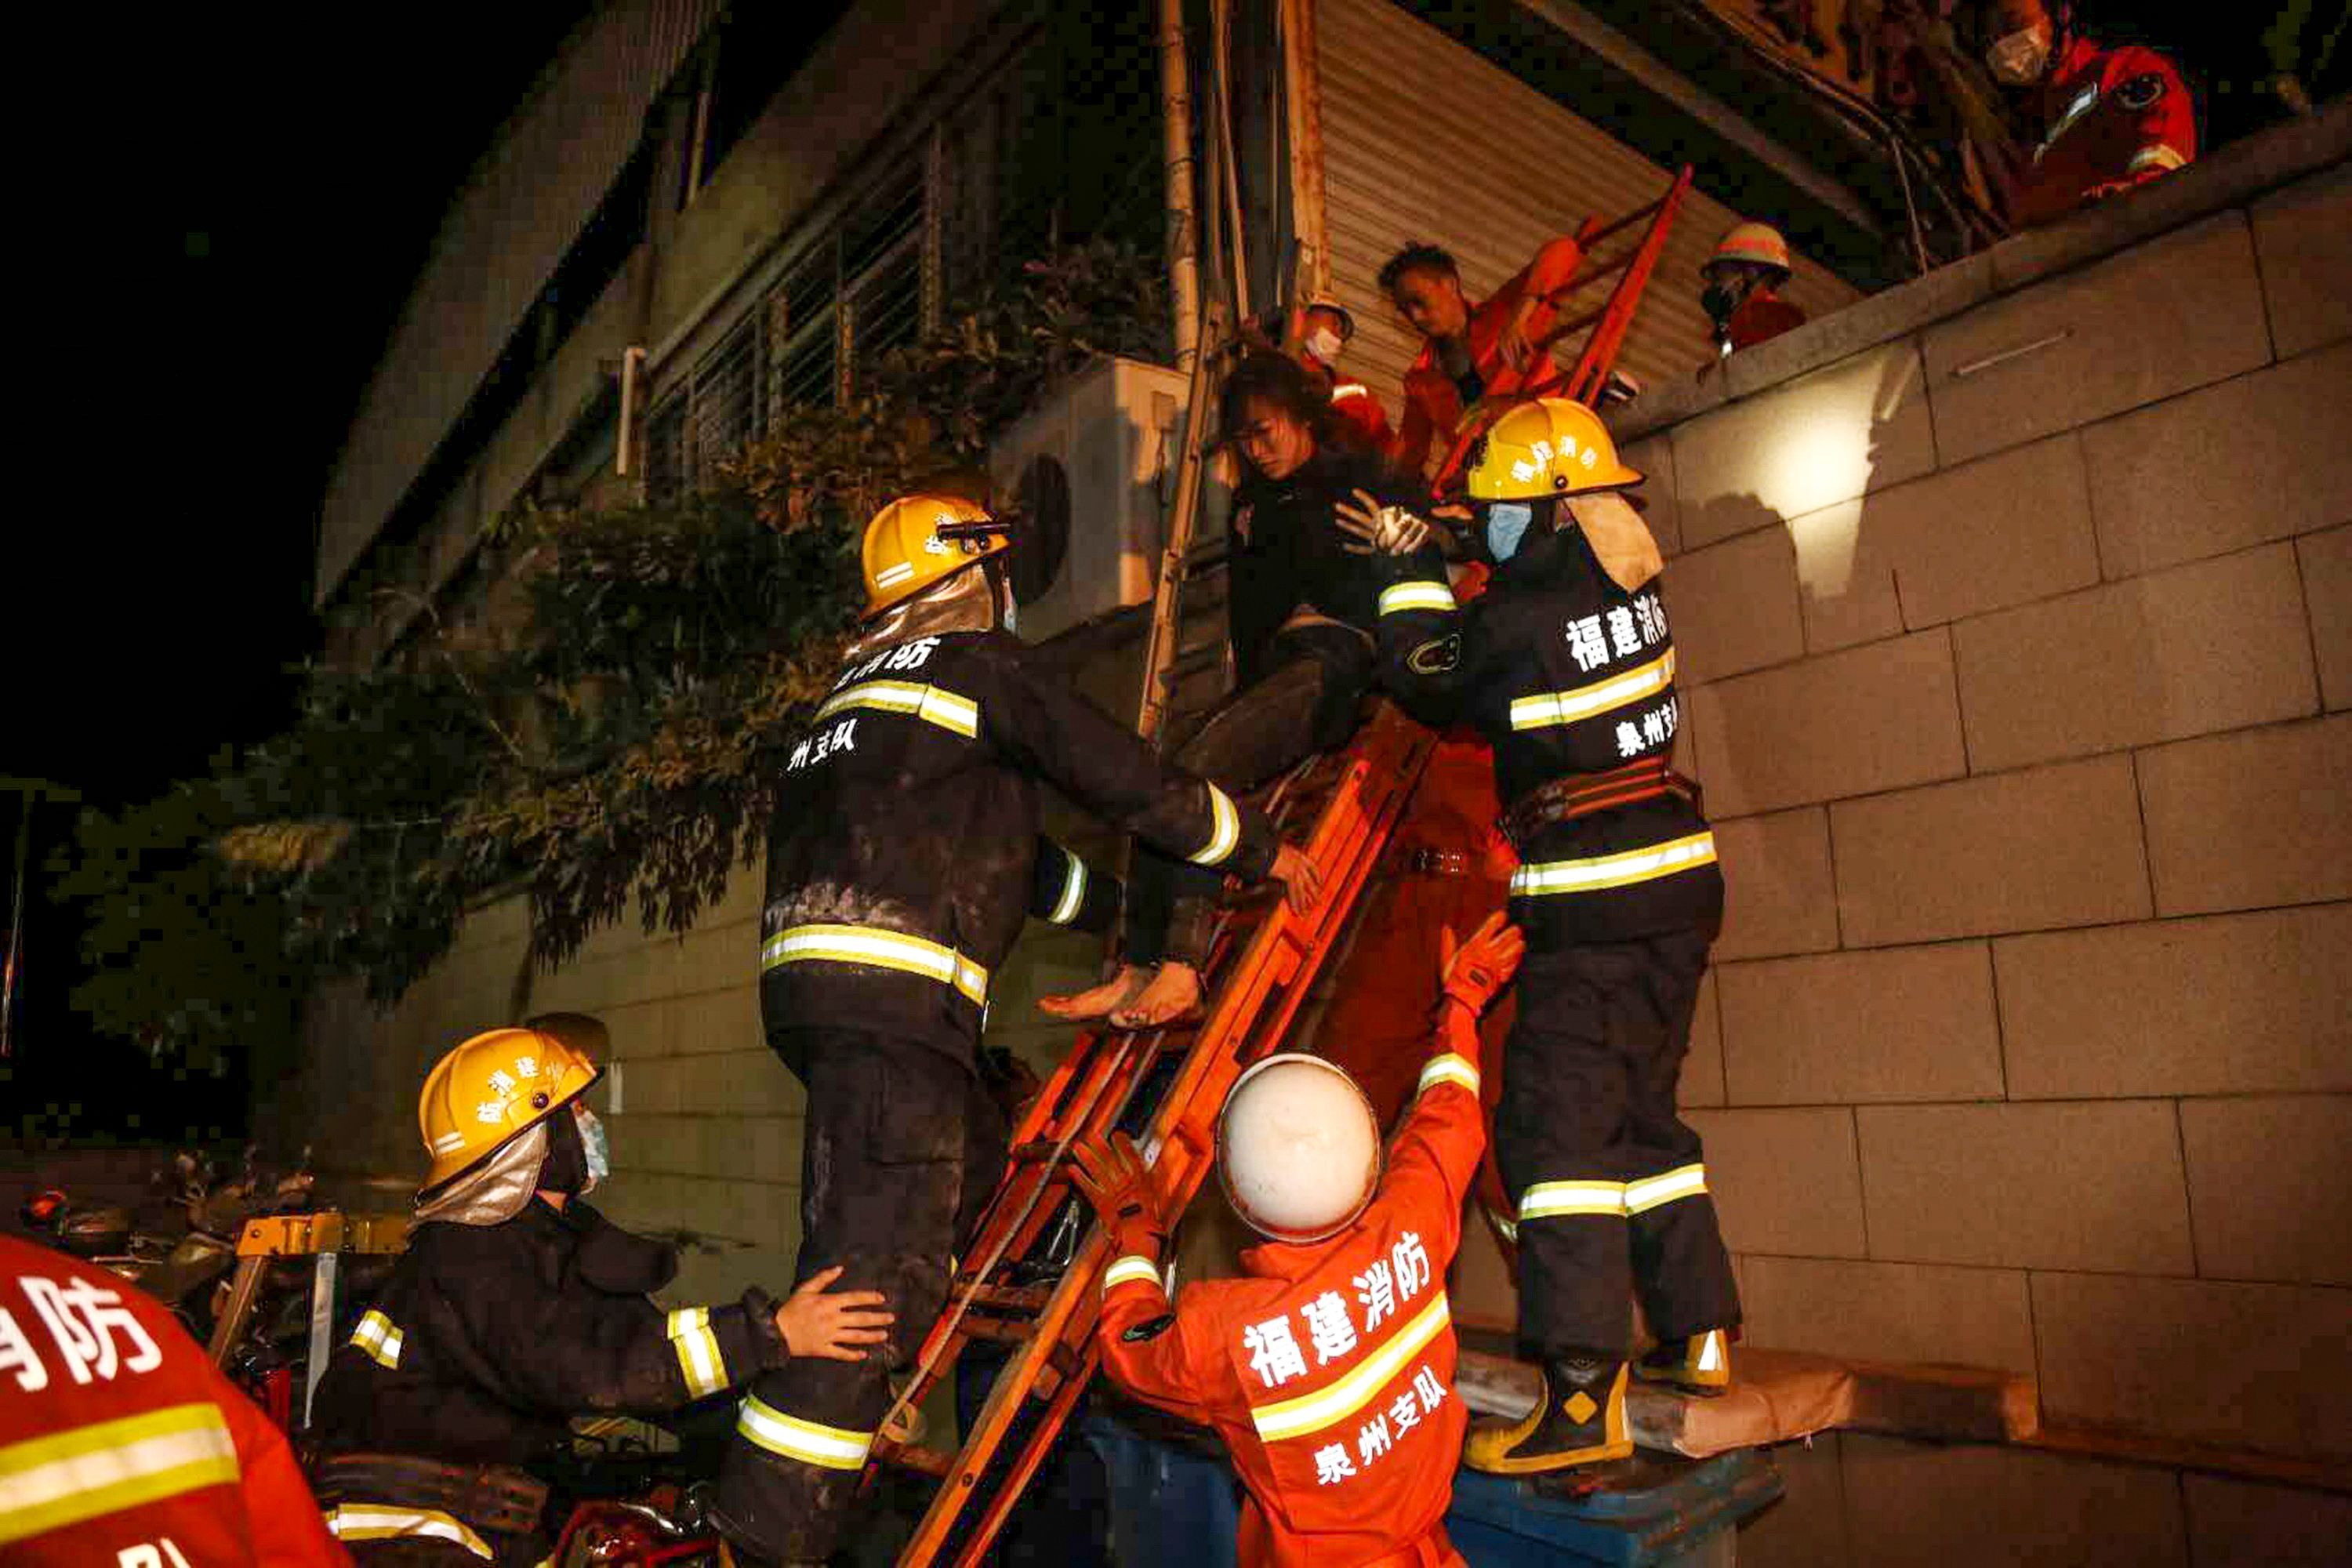 In this image, people are helped down a ladder